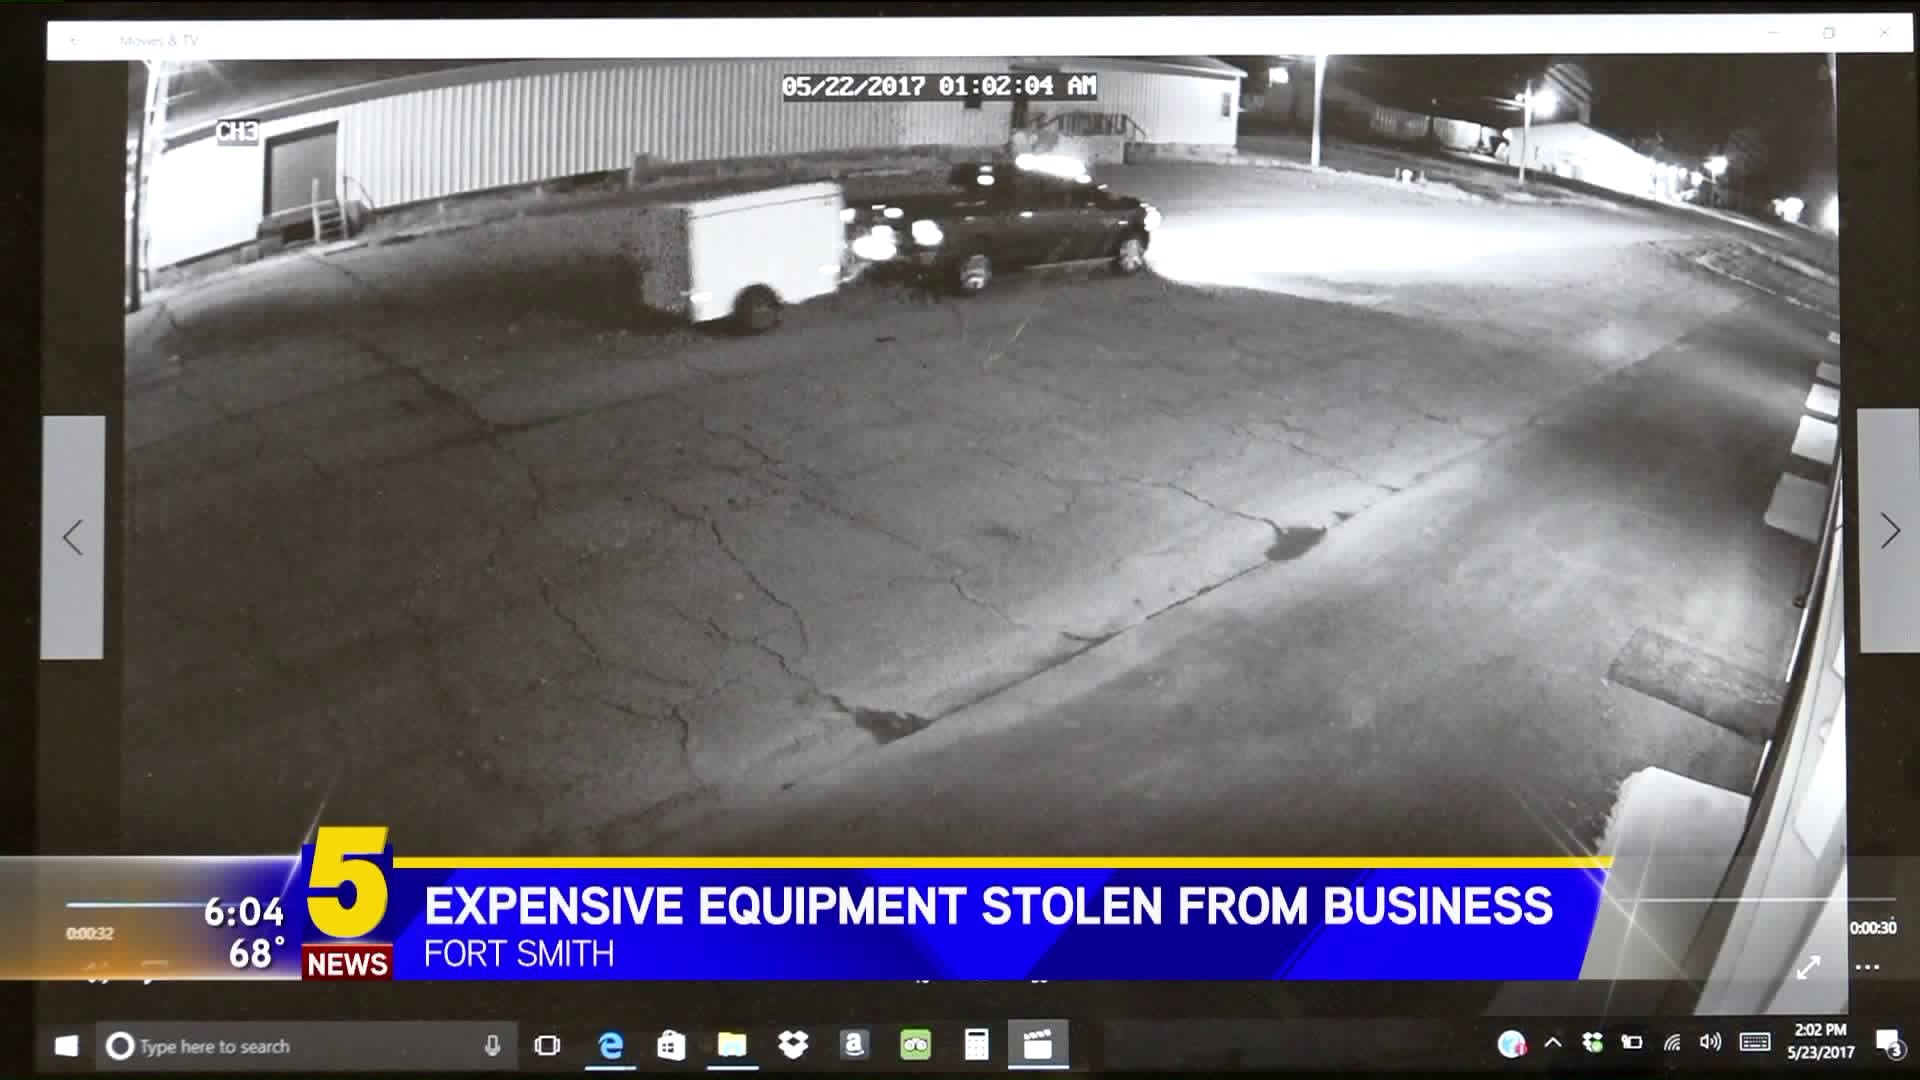 Expensive Equipment Stolen From Business